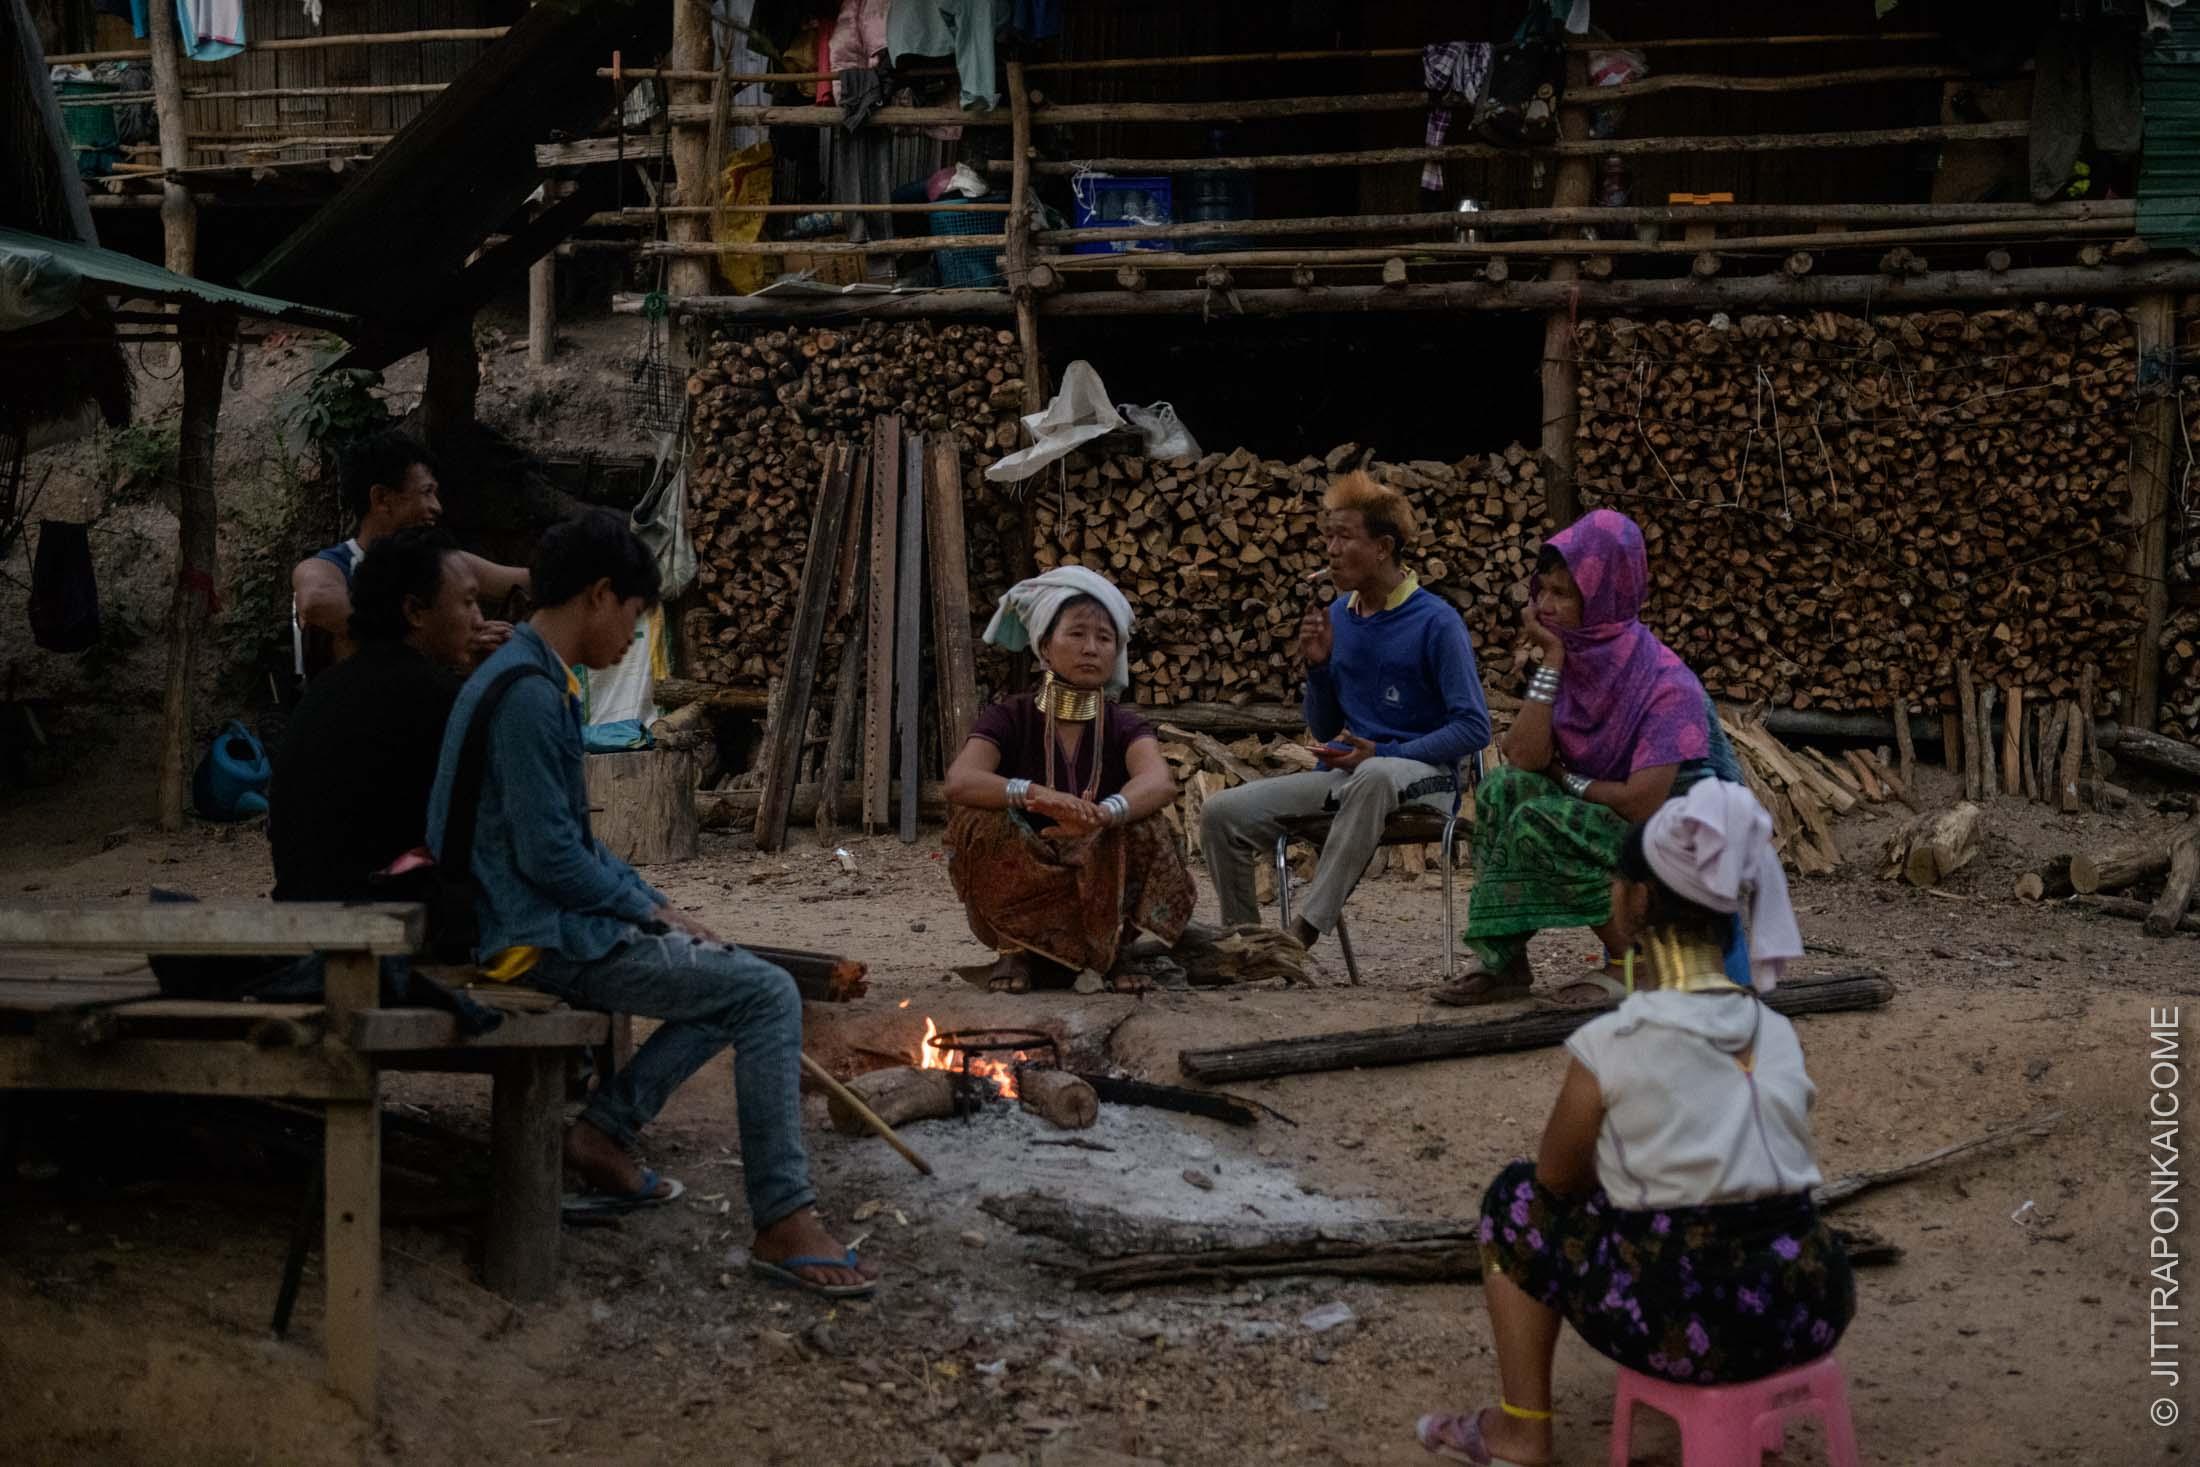 Evening gathering during the business closure to prevent the second wave of COVID-19 causing no income to the families in this village - &nbsp;Kayan Long Neck village in Chiang Mai.